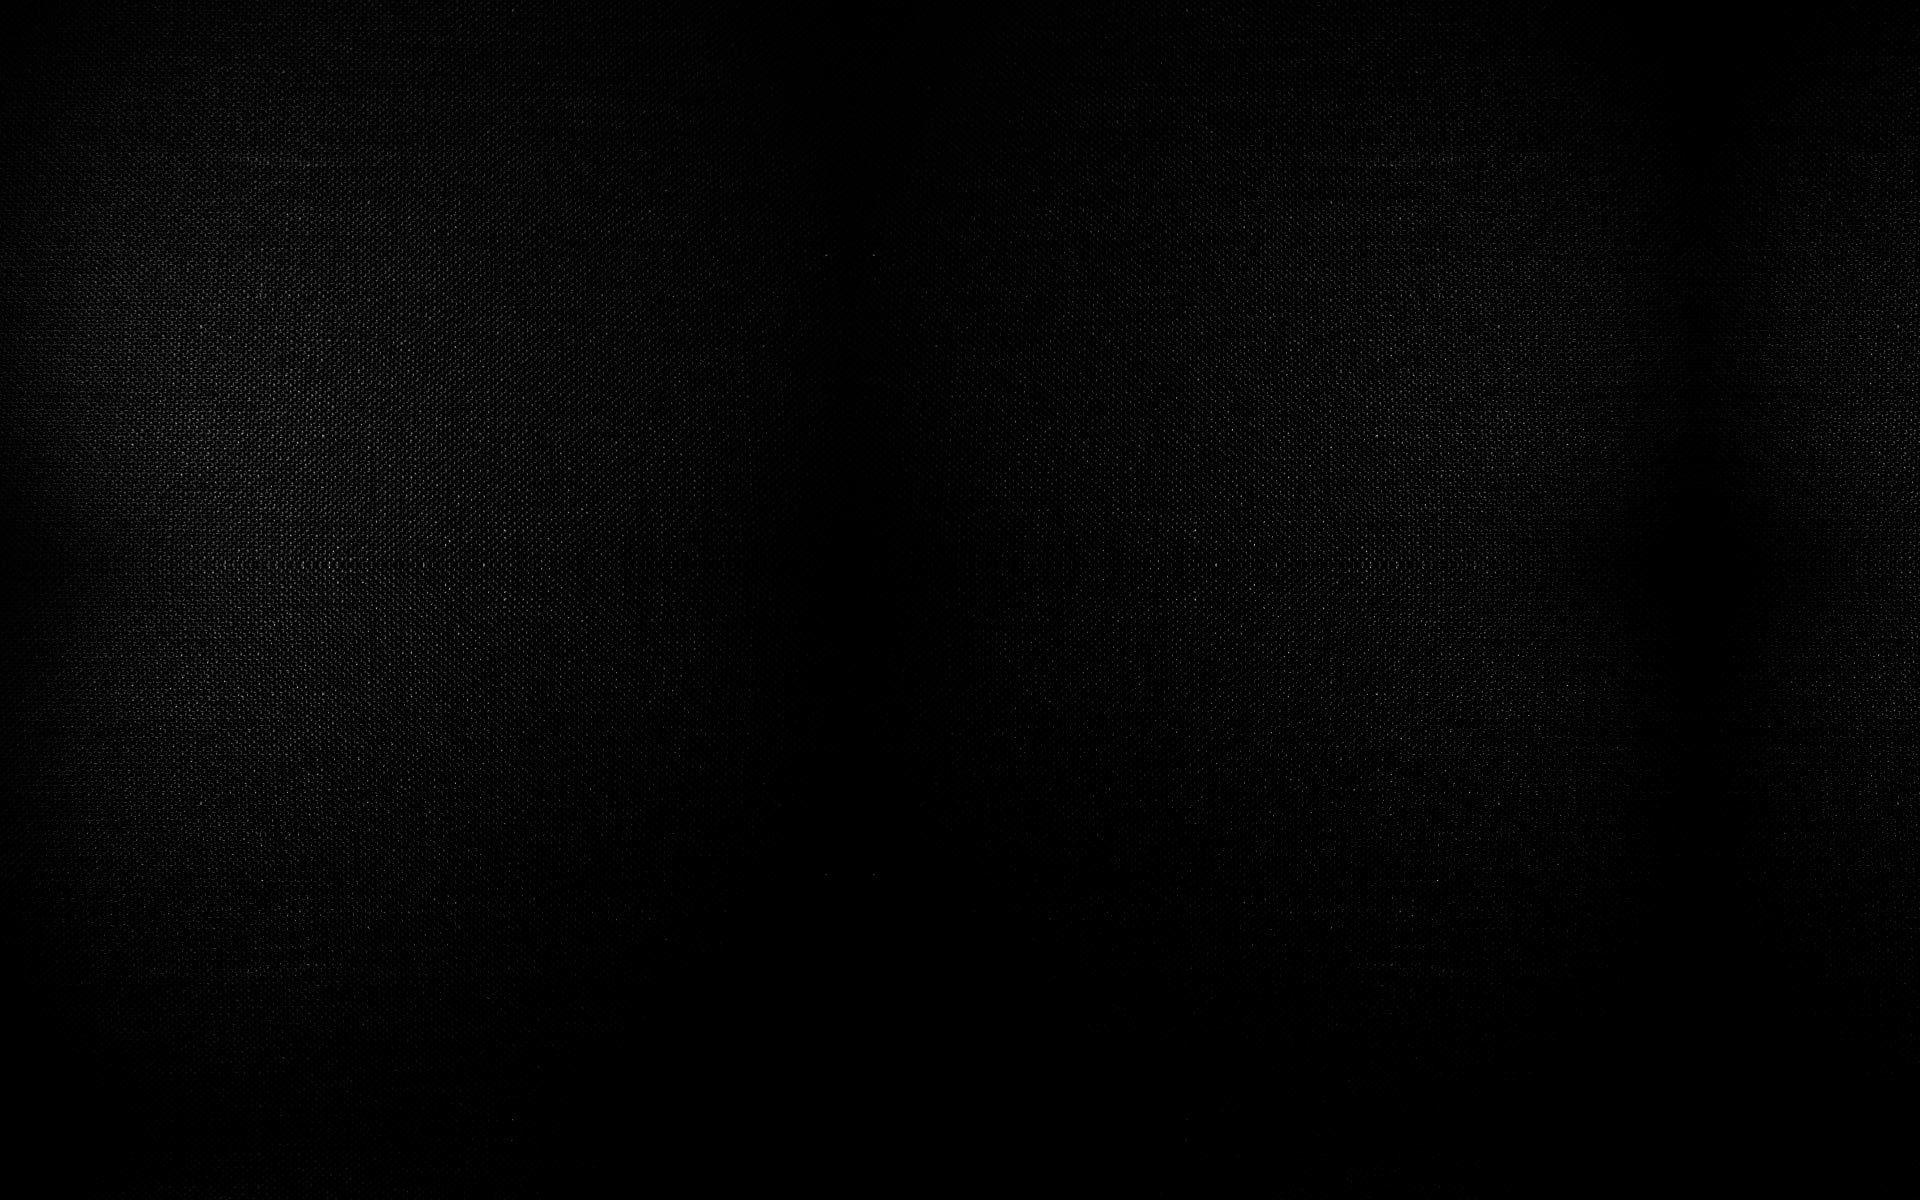 Fathomless black, Digital minimalism, Undefined space, Uncomplicated aesthetic, Pure abstraction, 1920x1200 HD Desktop